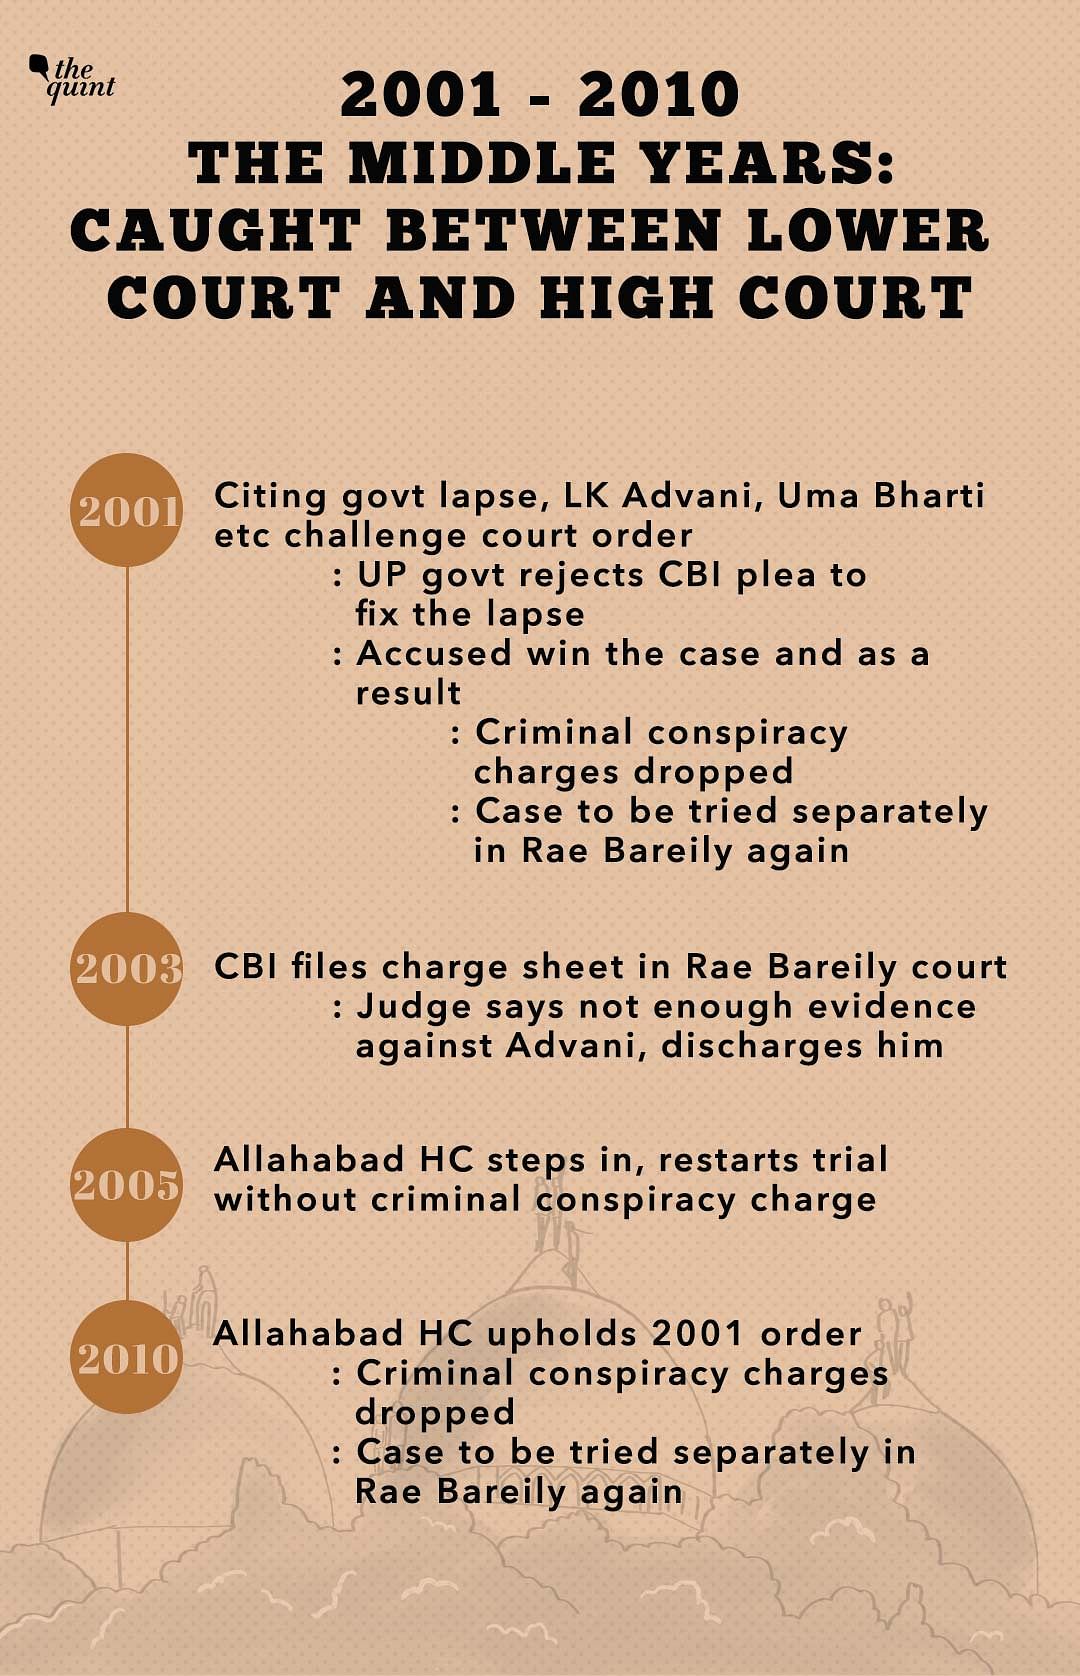 The Quint brings you a detailed timeline of the criminal case that was fought in court for years.